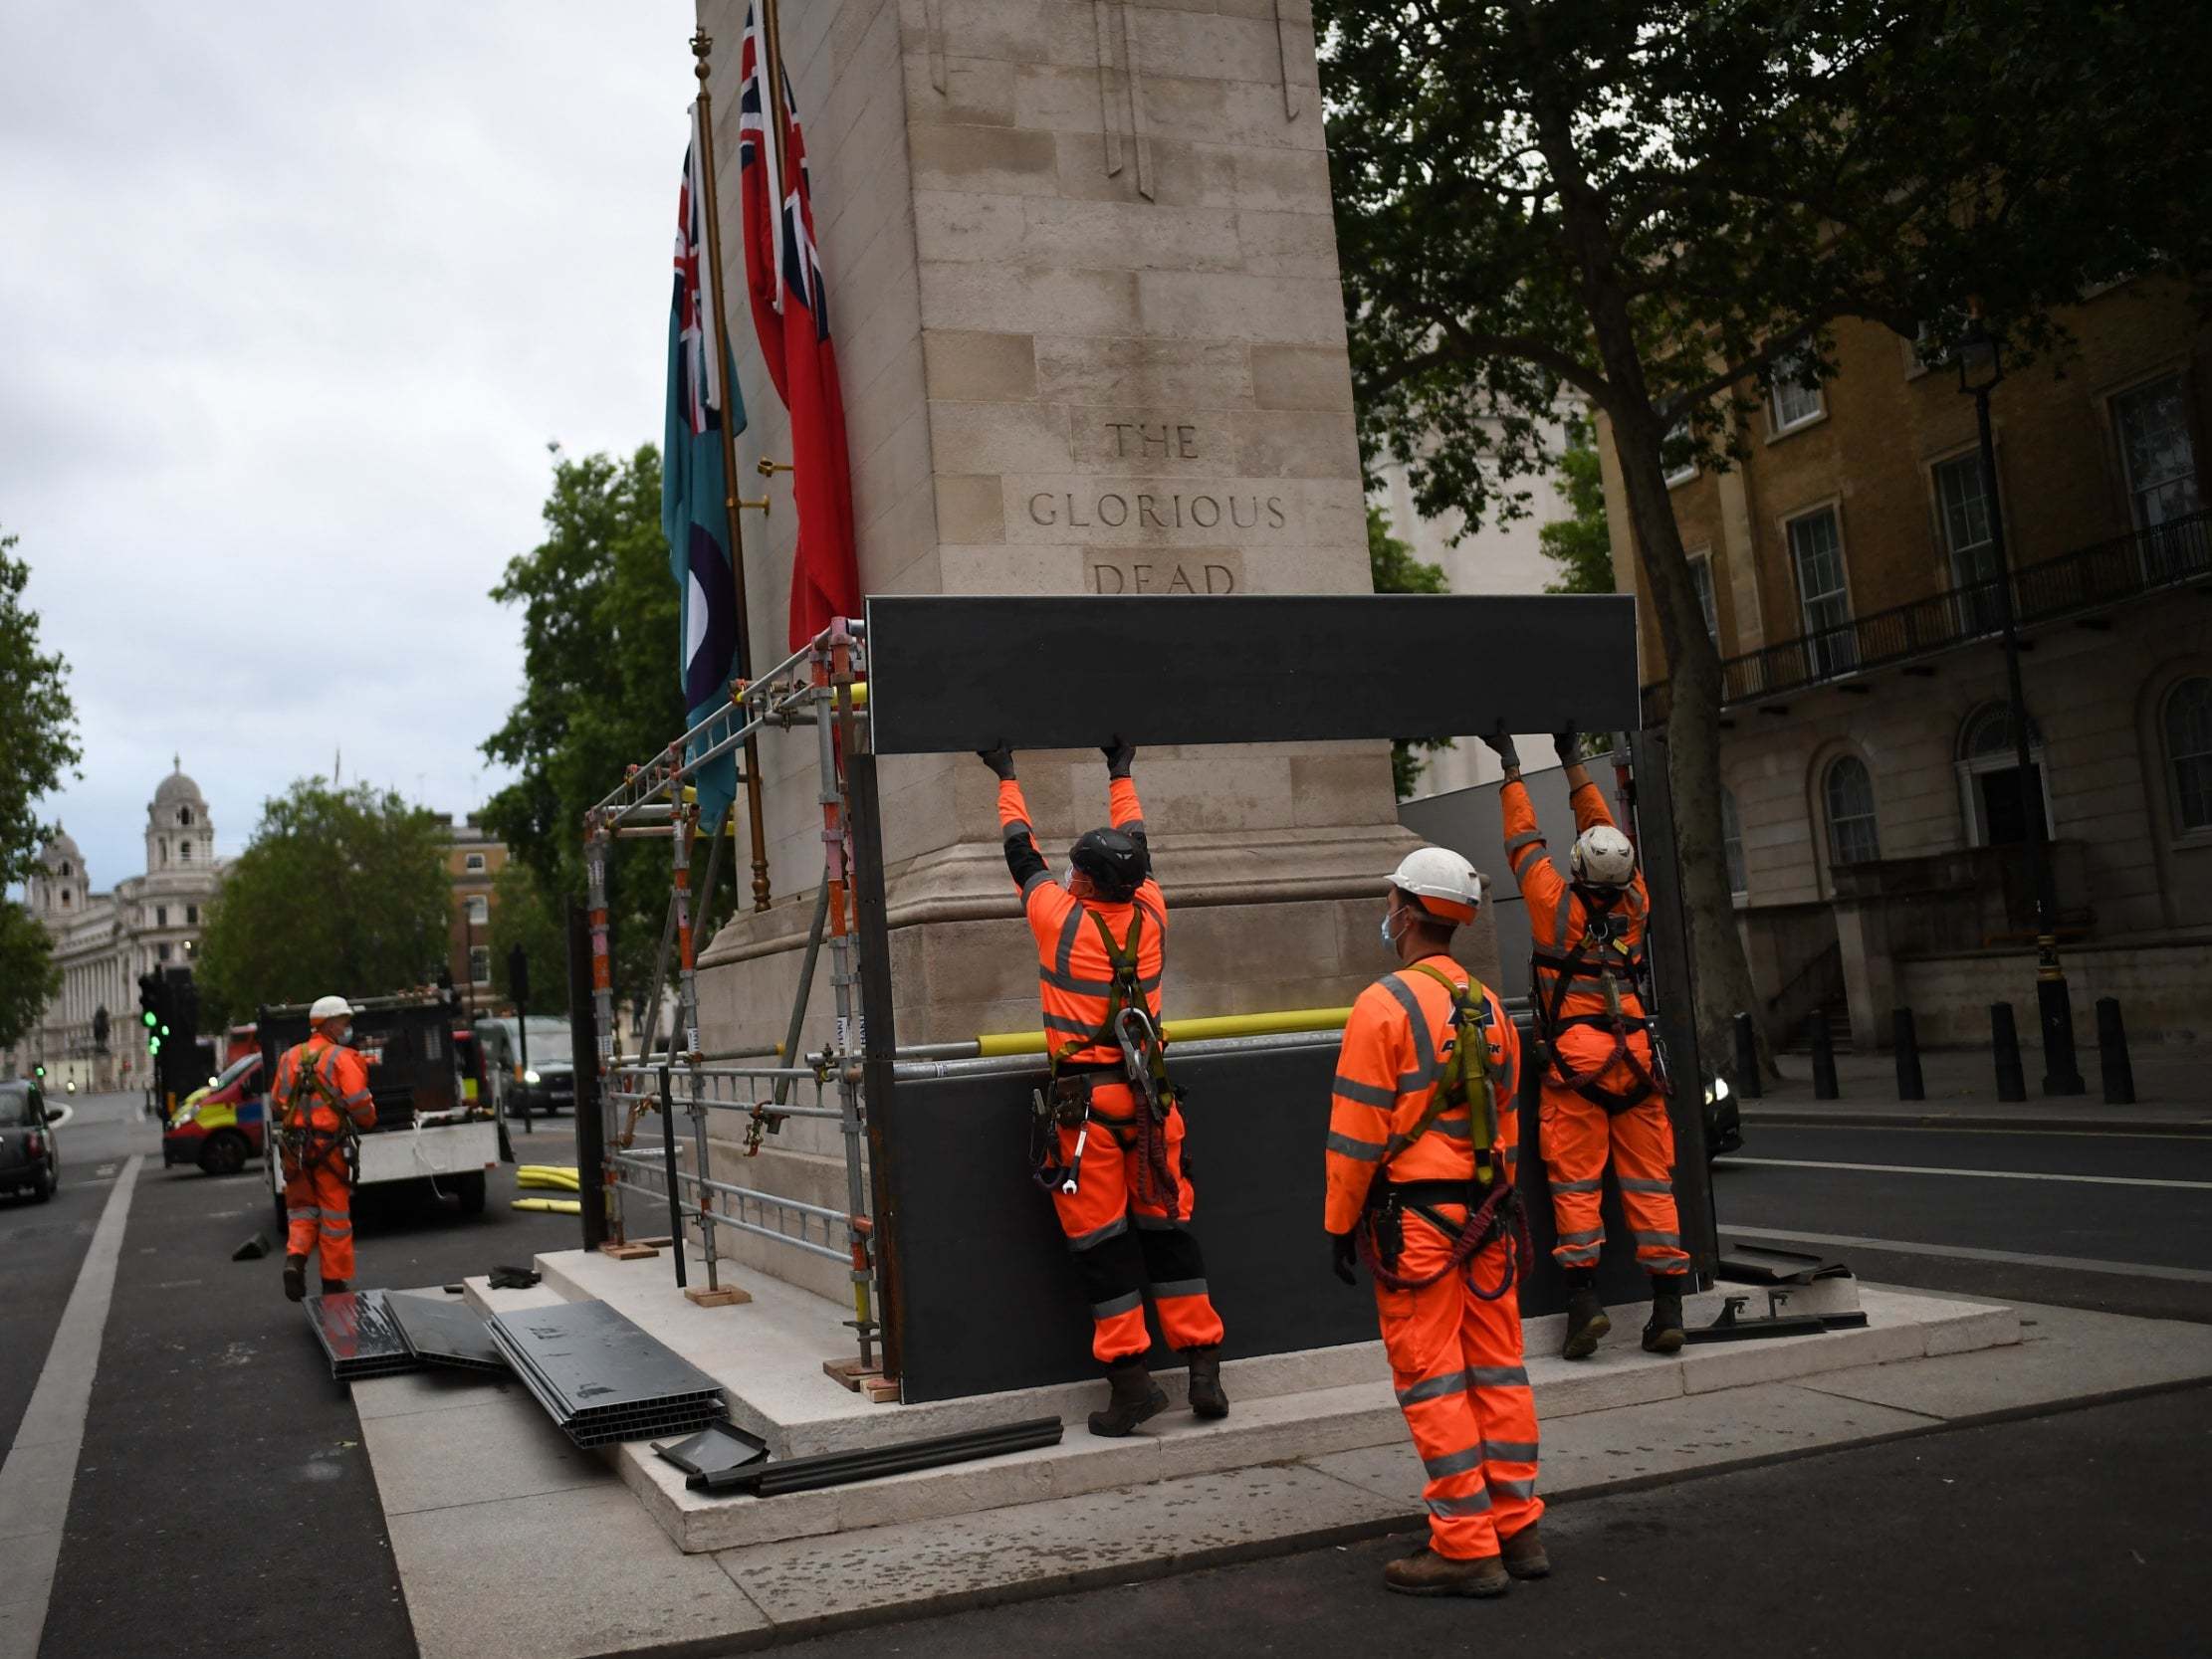 Scaffolding placed around Winston Churchill statue and Cenotaph in London ahead of protests thumbnail